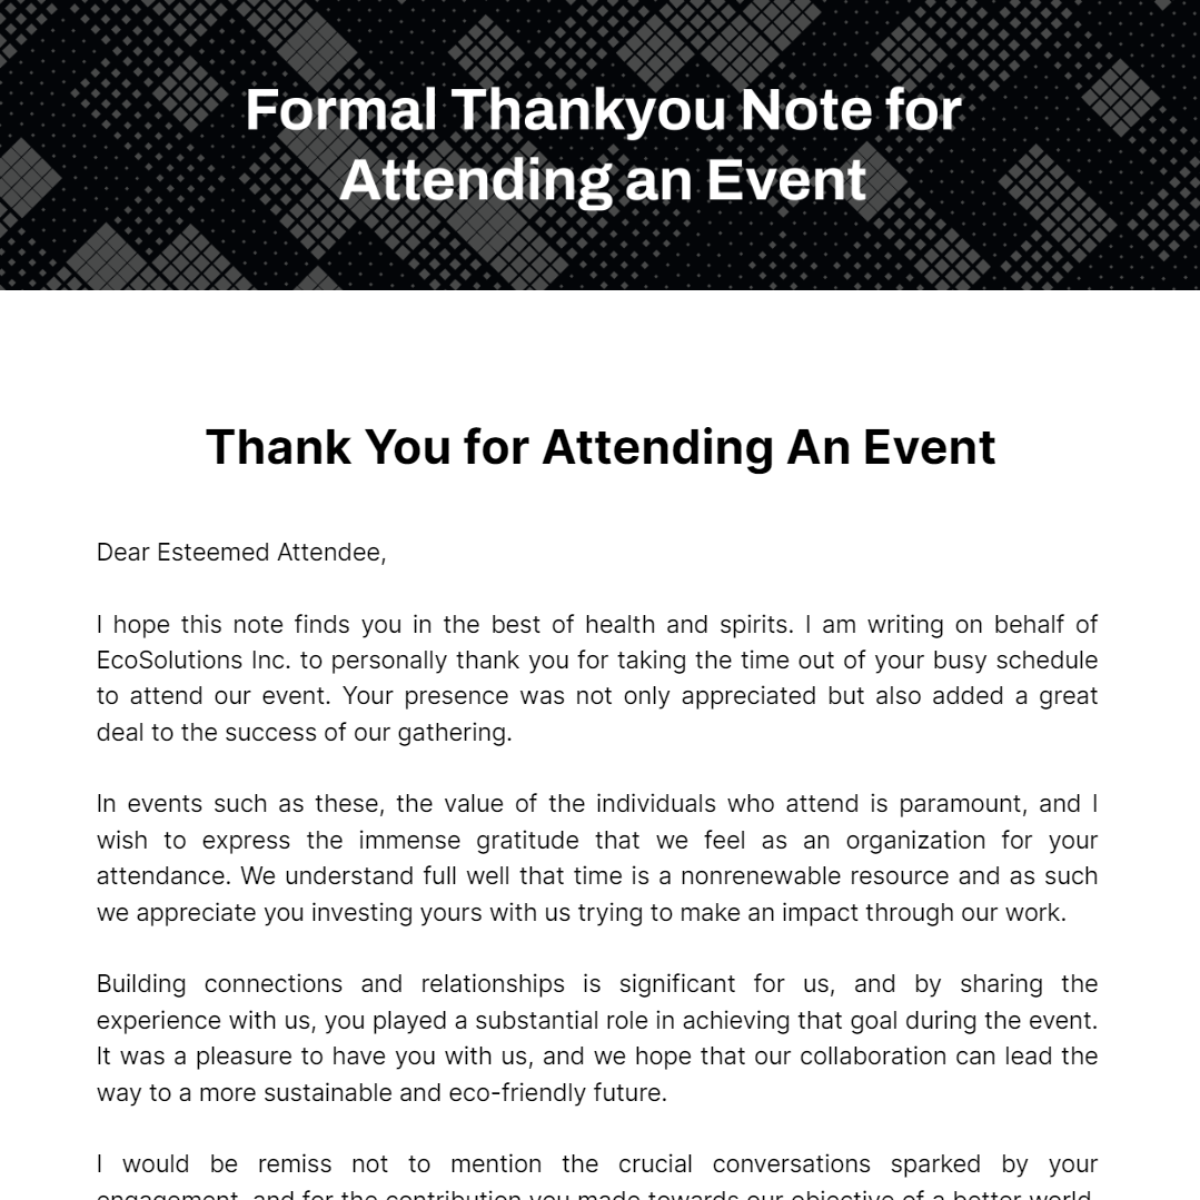 Formal Thankyou Note for Attending an Event Template